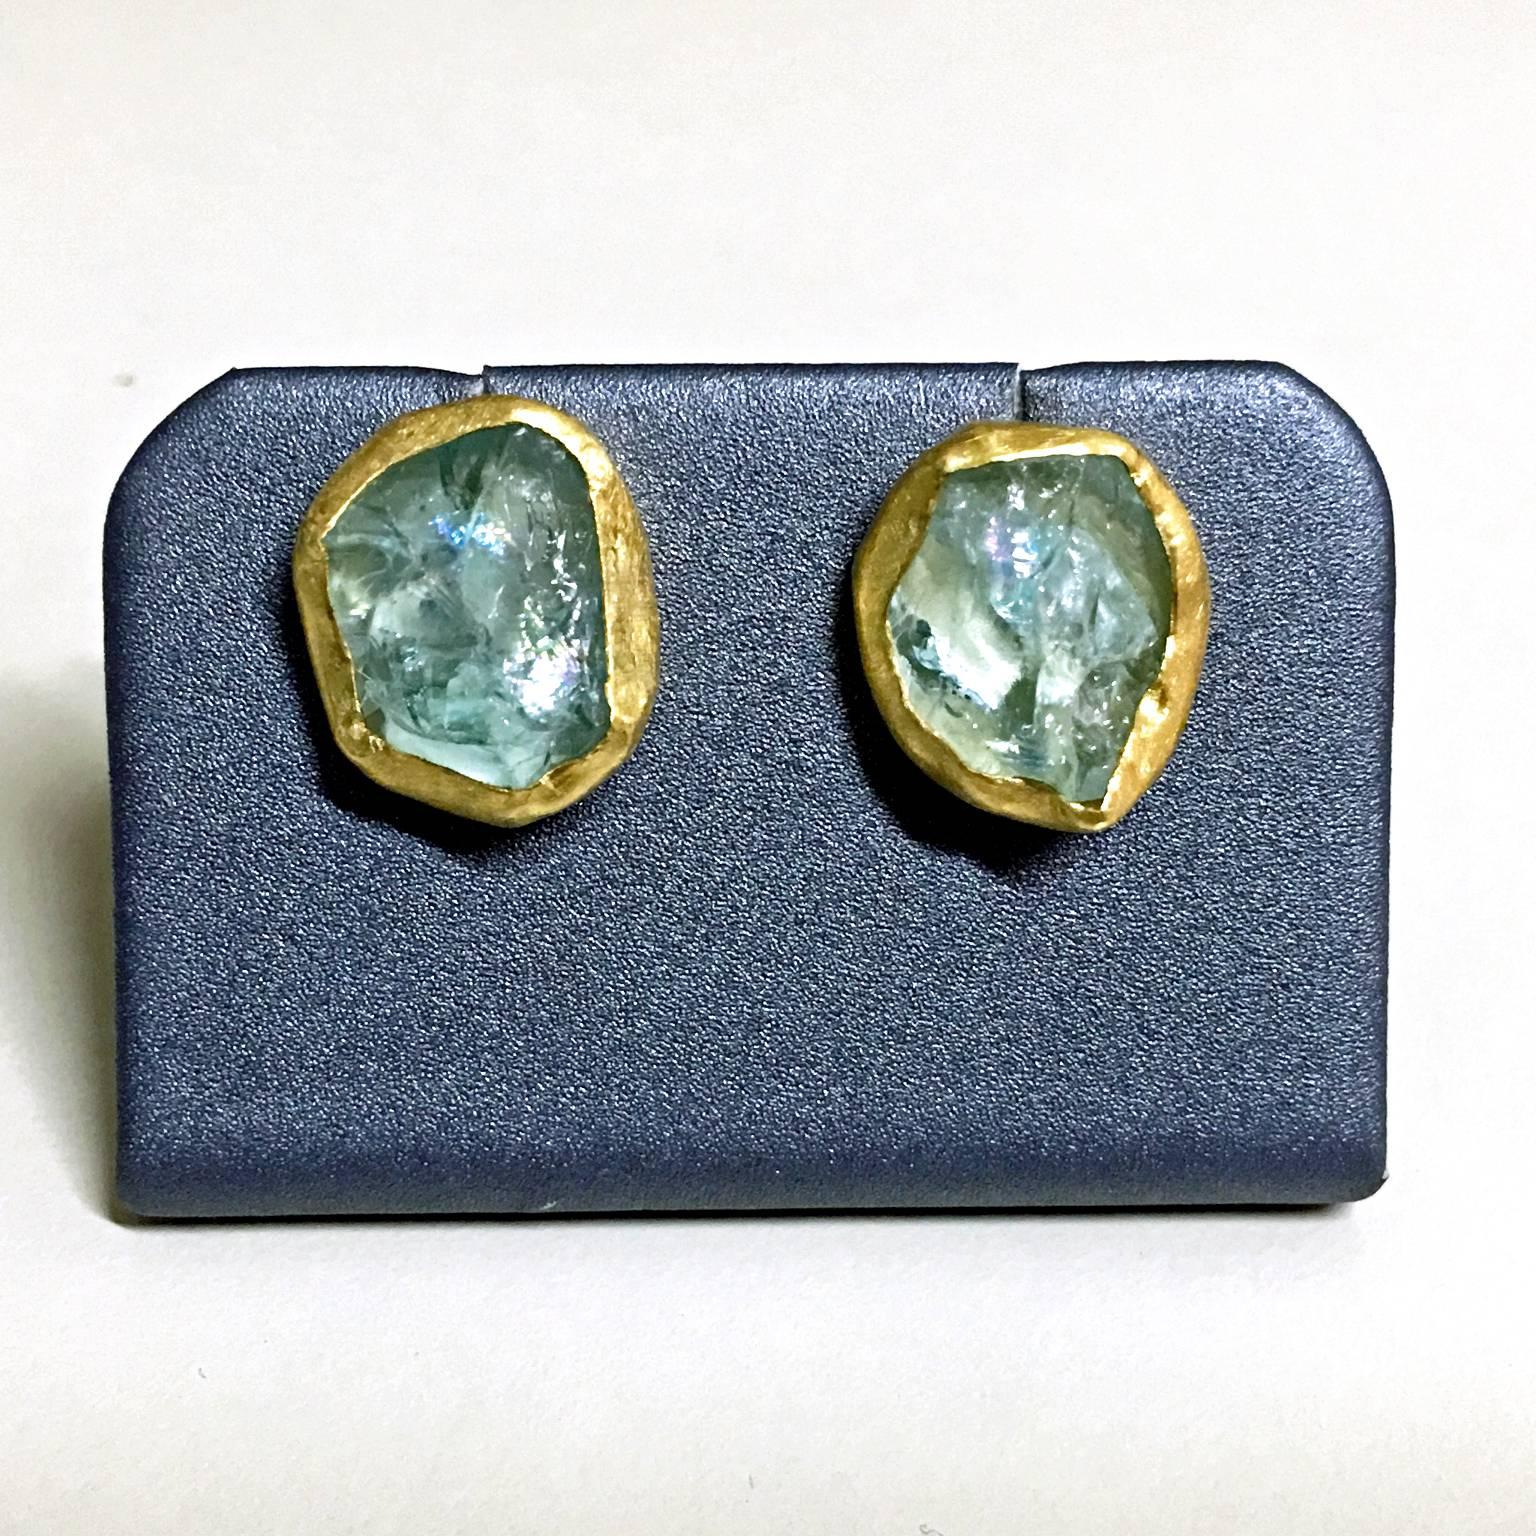 One-of-a-Kind Earrings handcrafted in 22k yellow gold with aquamarine crystals showcasing beautiful rainbow flashes from multiple angles.